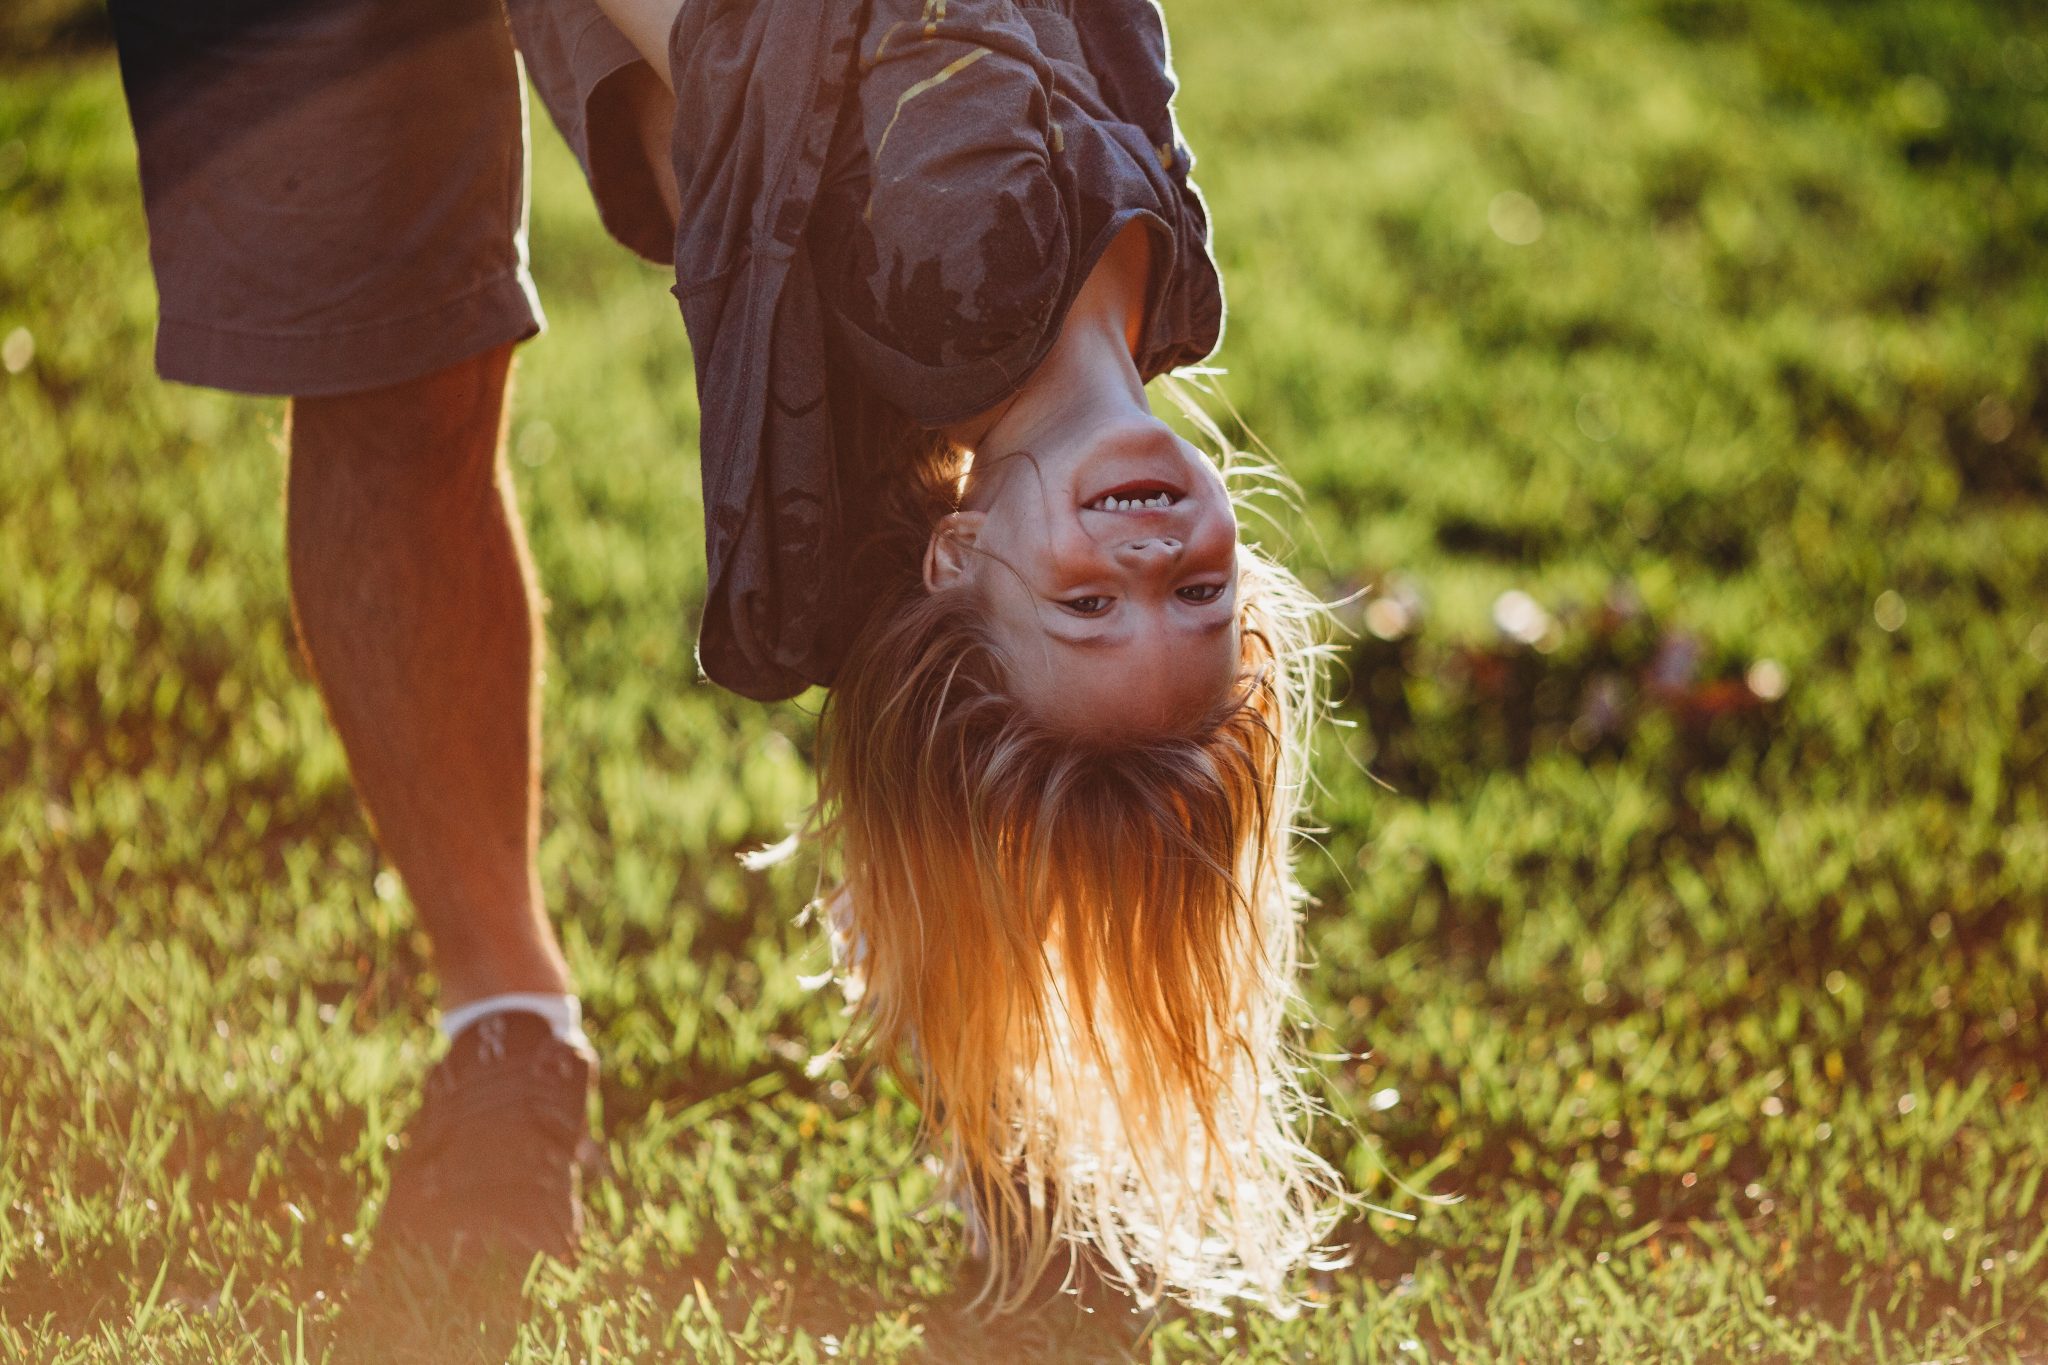 Backlit image of young girl hanging upside down, sun lighting up her long hair